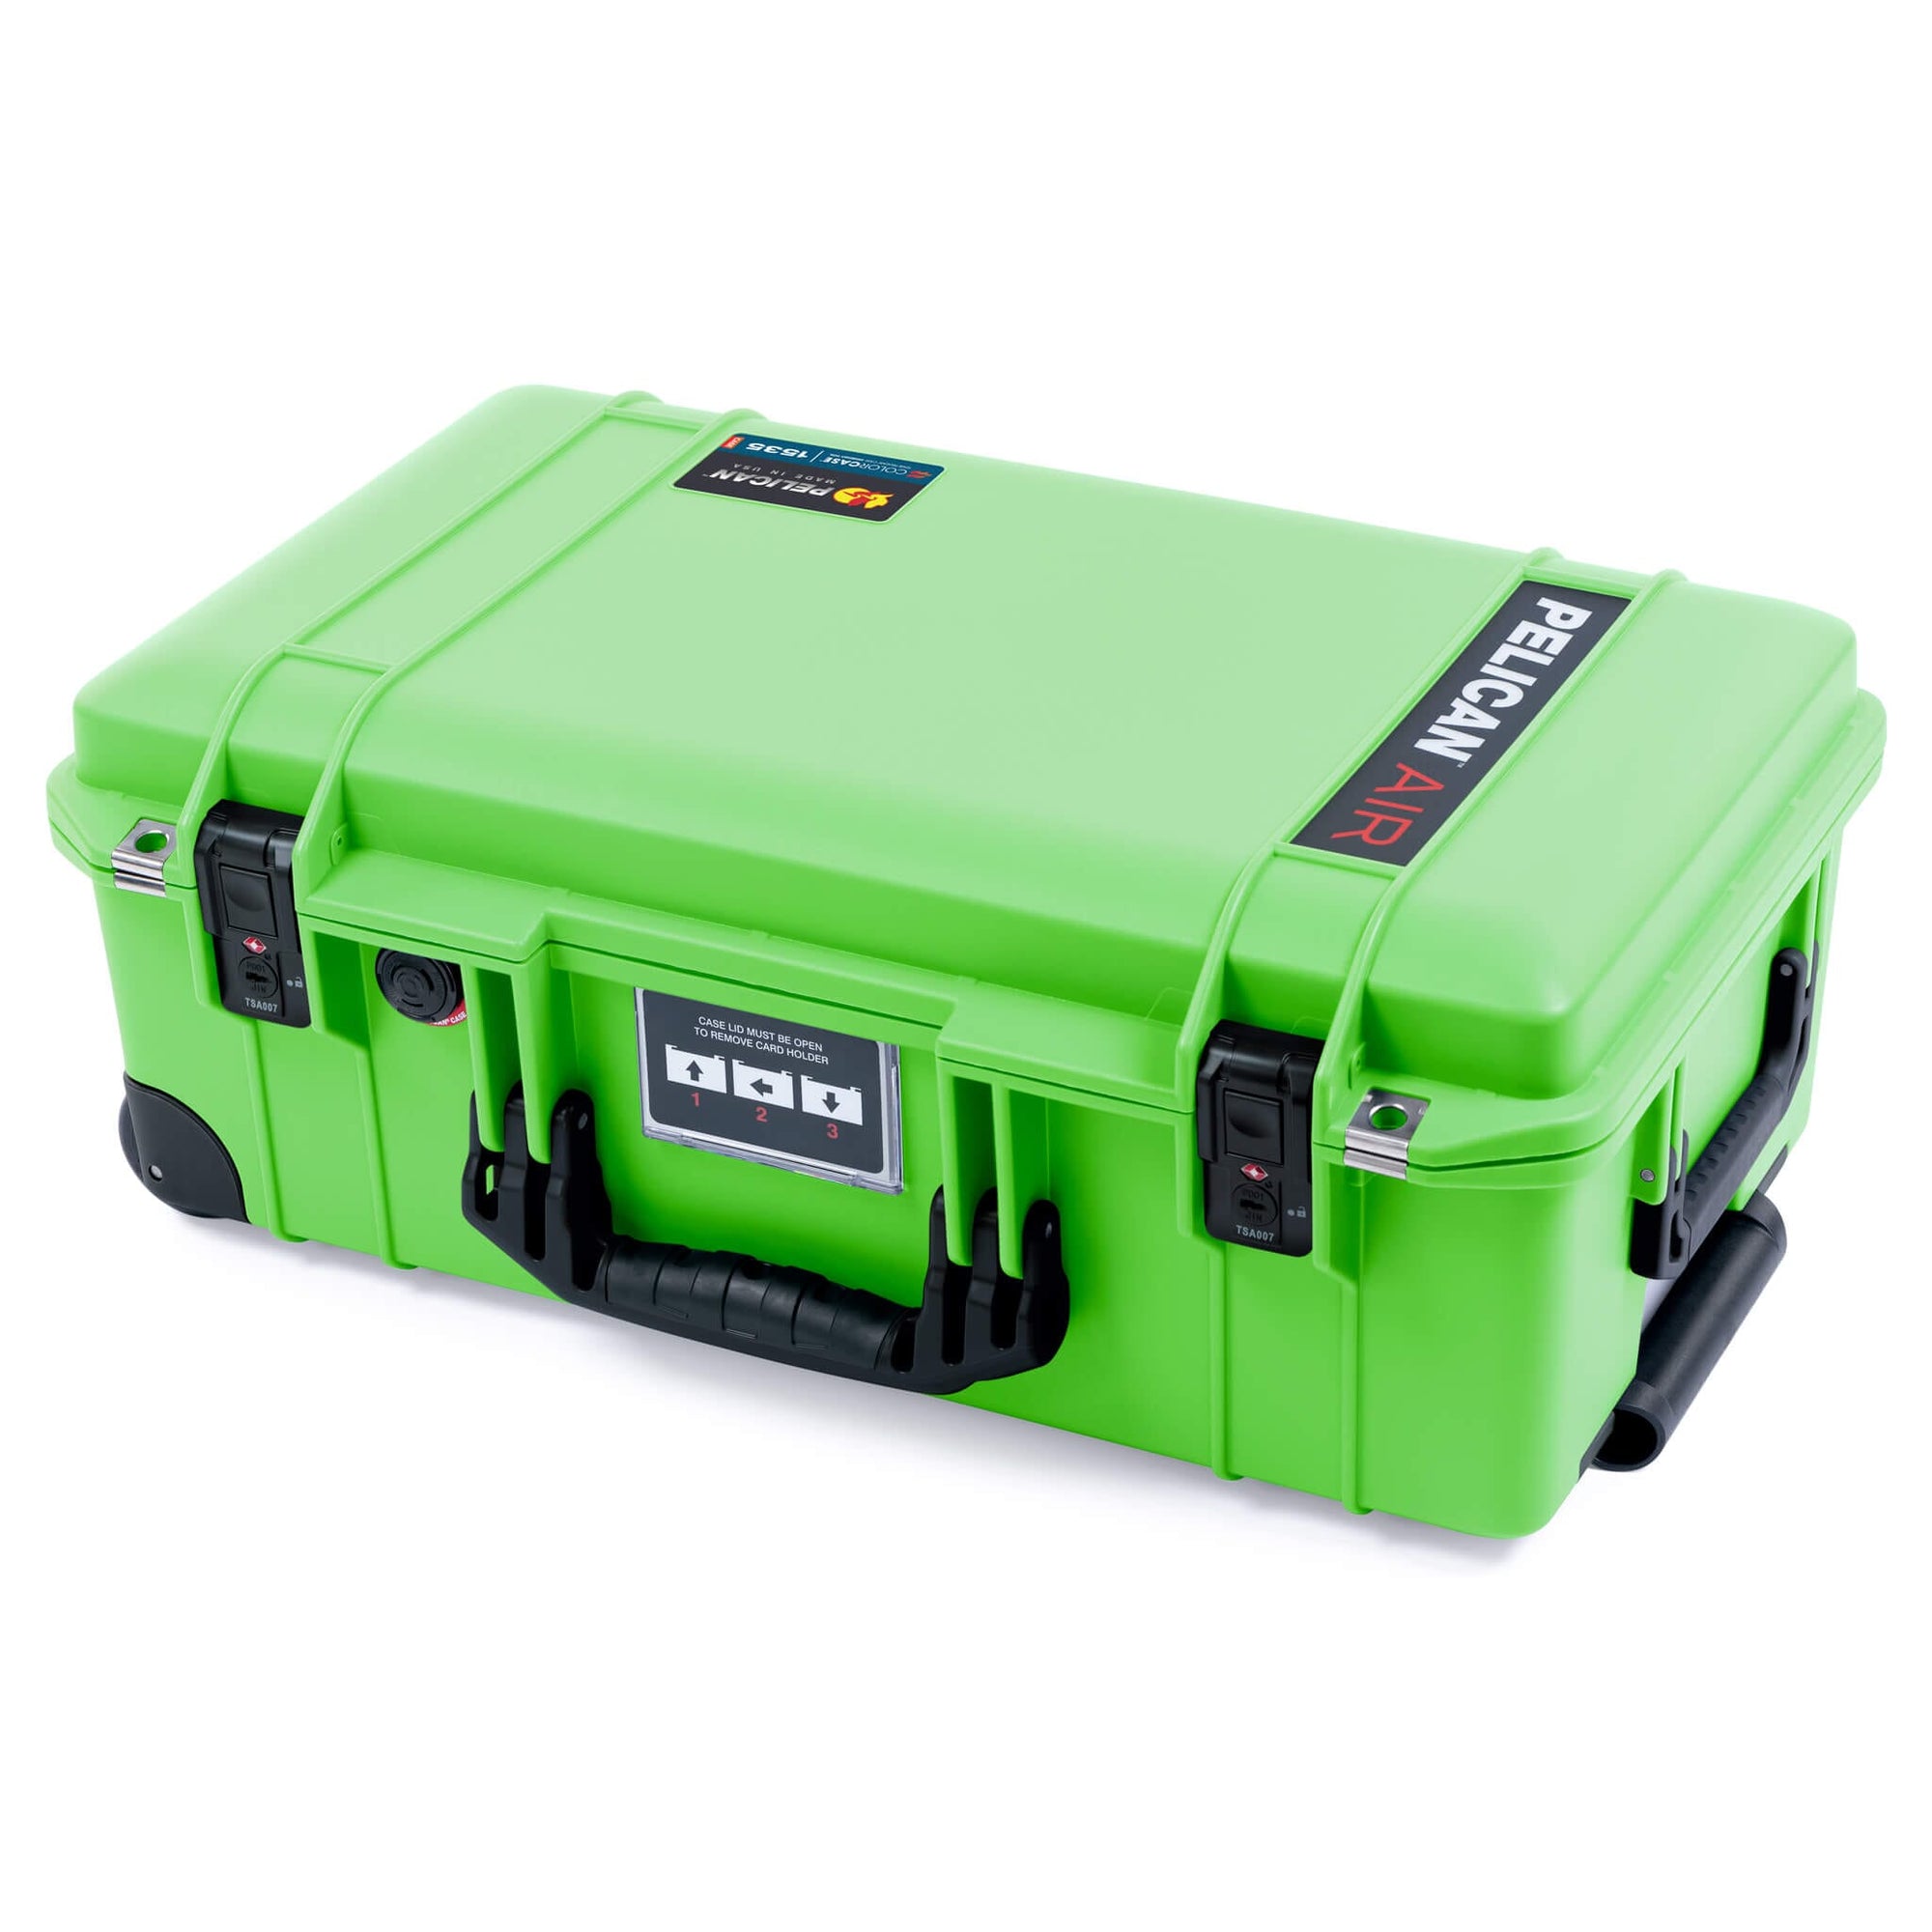 Pelican 1535 Air Case, Lime Green with Black Handles, TSA Locking Latches & Trolley ColorCase 